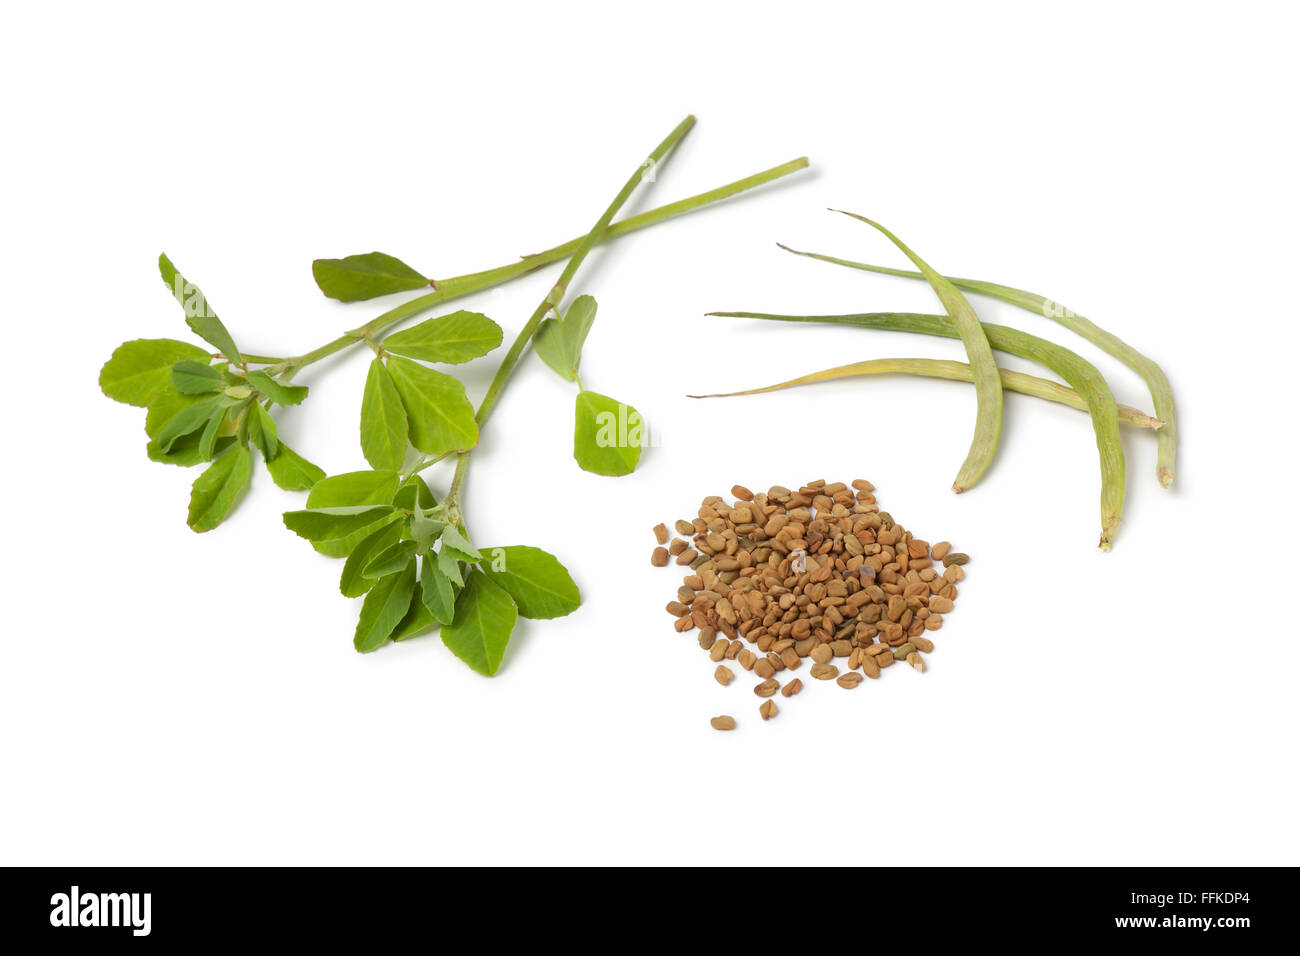 Fenugreek leaves, pods and seeds on white background Stock Photo